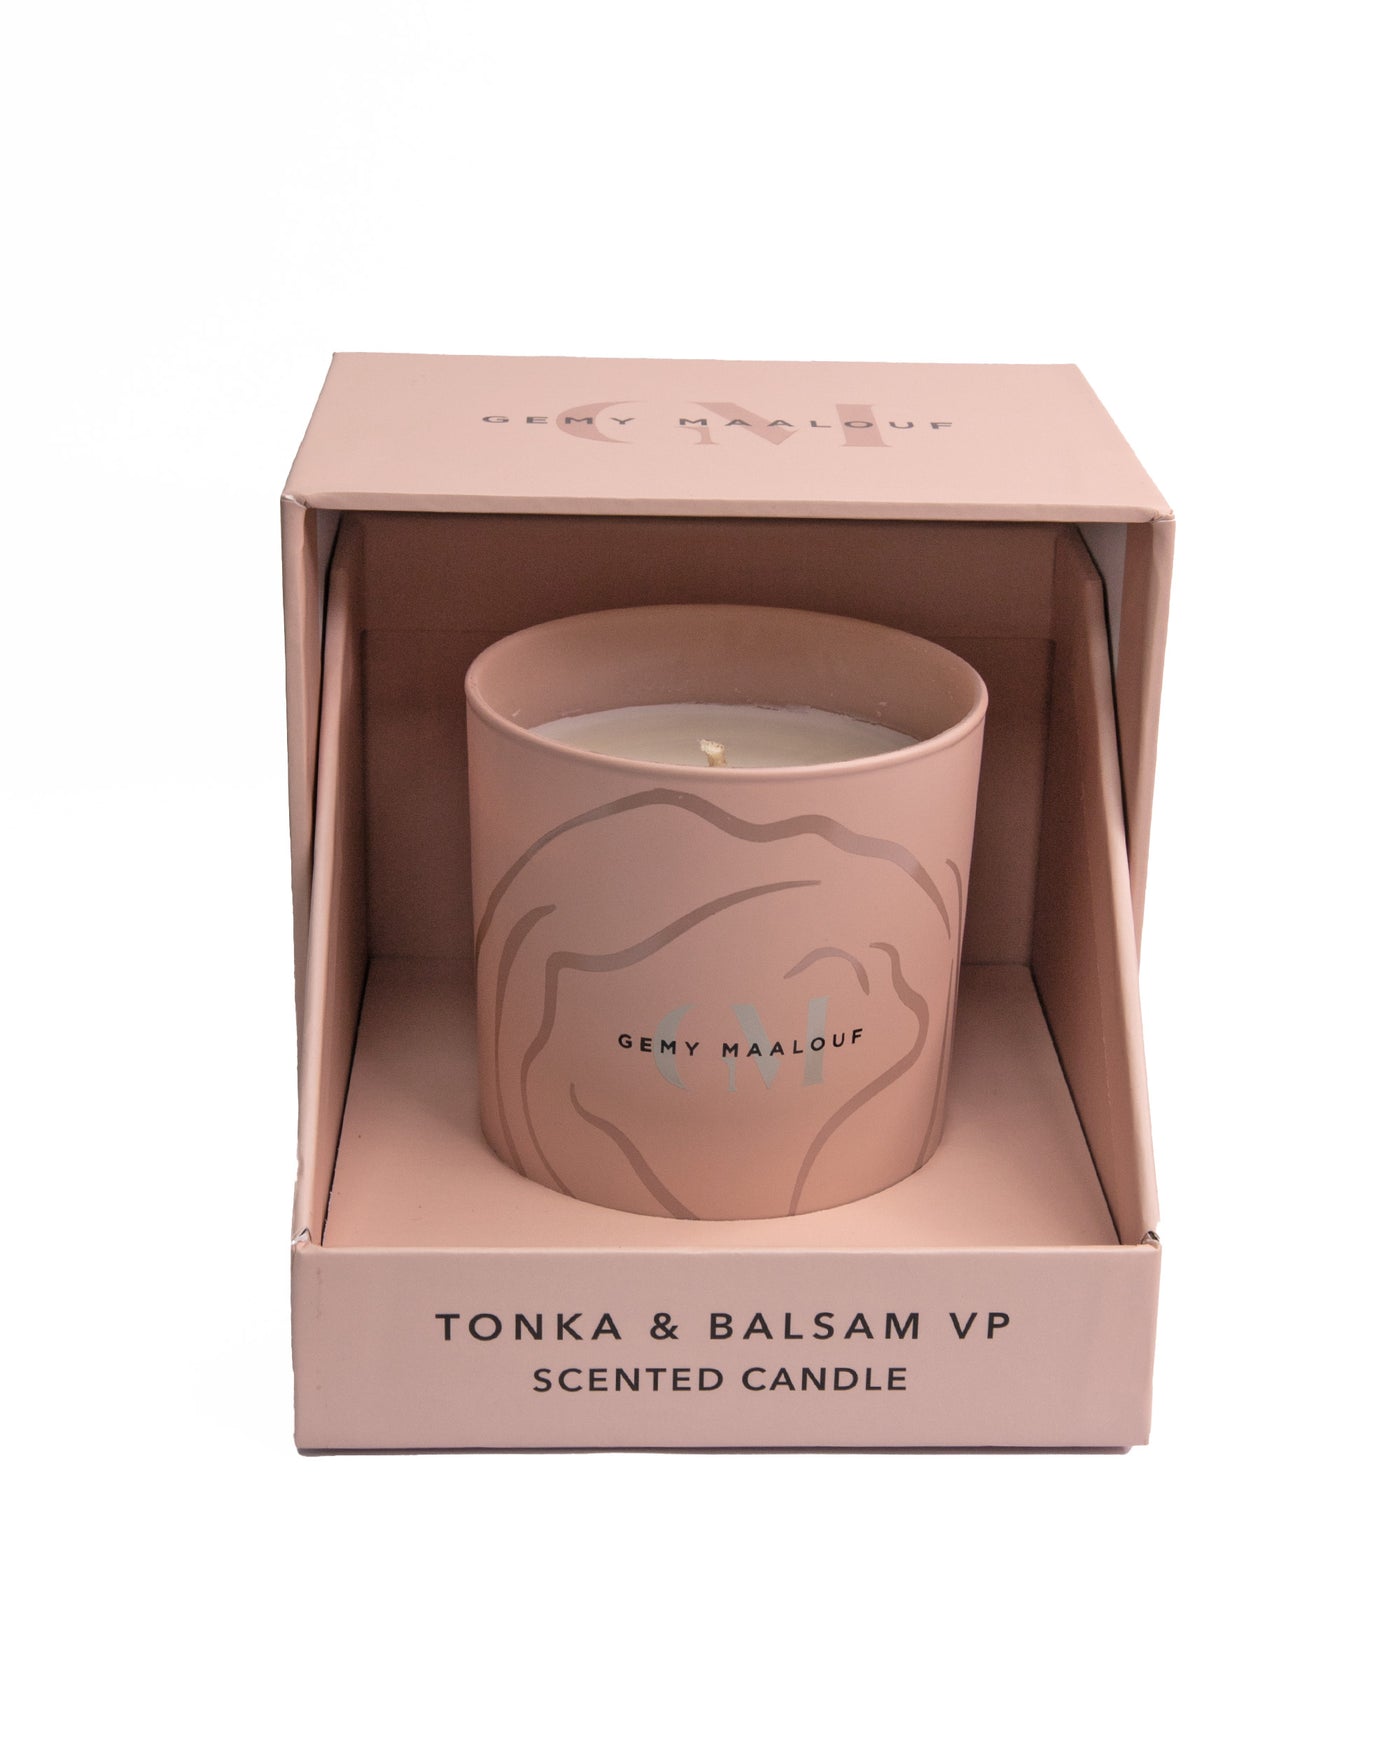 Tonka & Balsam VP Scented Candle